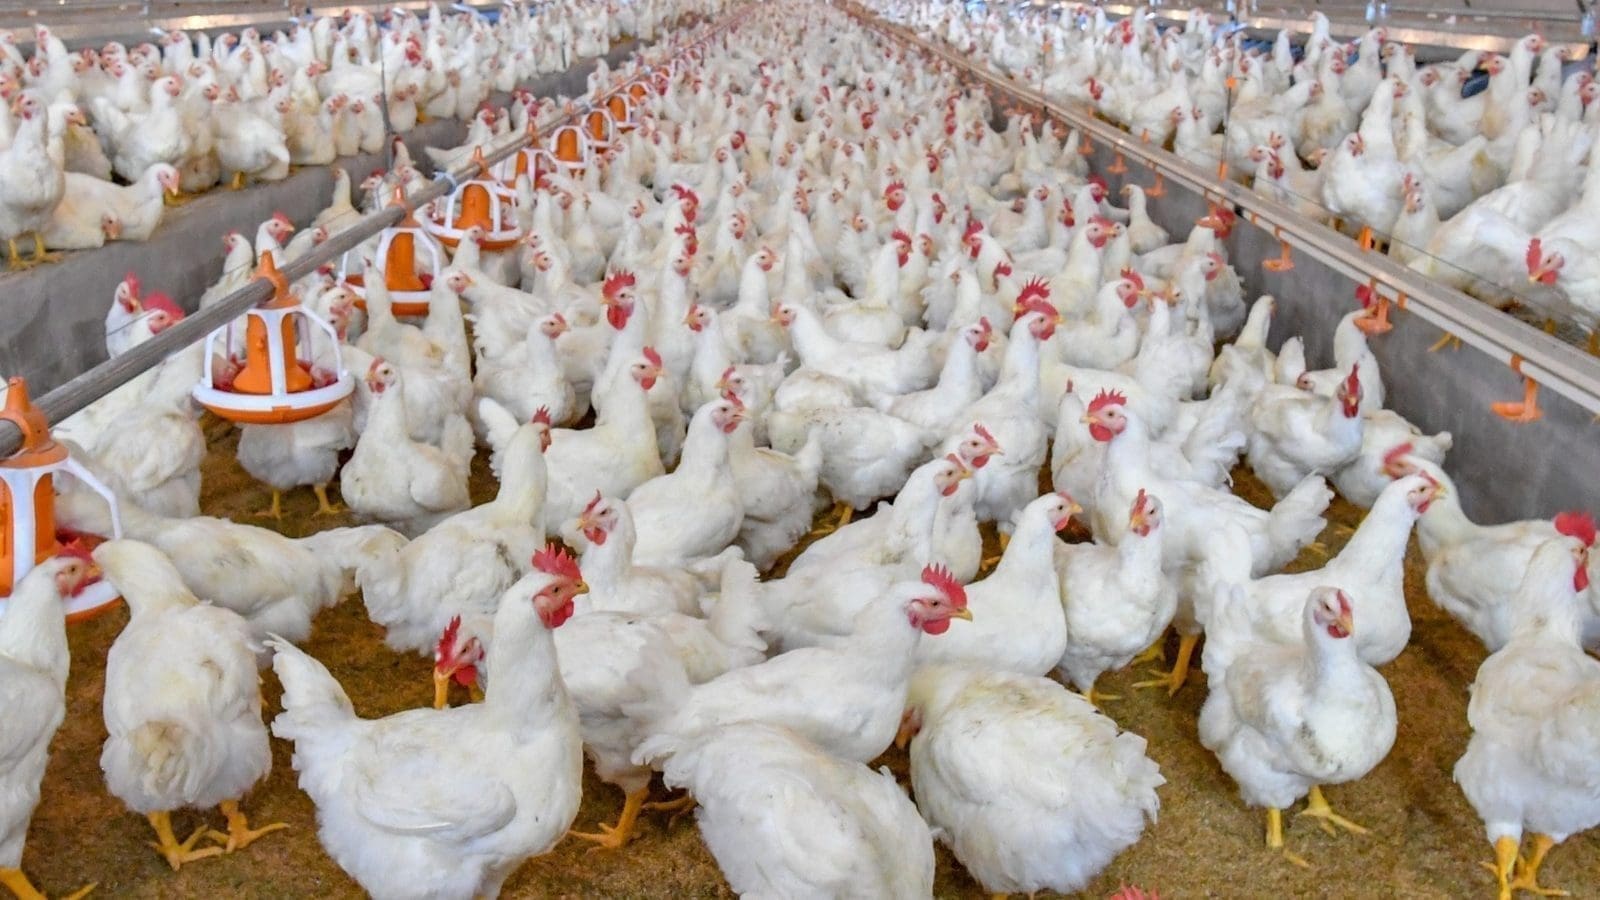 South African poultry industry faces loss as 7.5 million birds culled due to Avian Influenza outbreaks